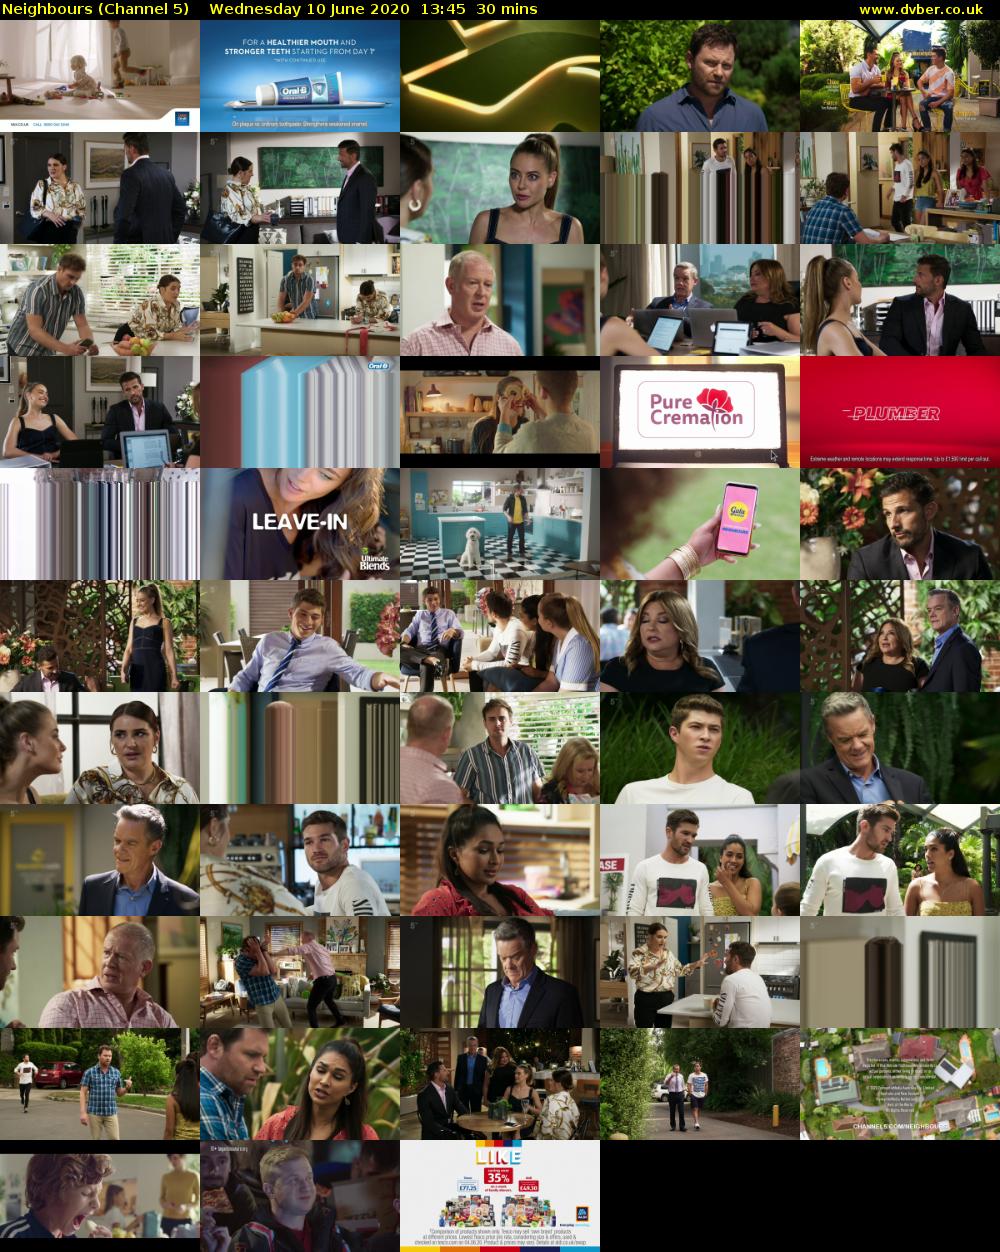 Neighbours (Channel 5) Wednesday 10 June 2020 13:45 - 14:15